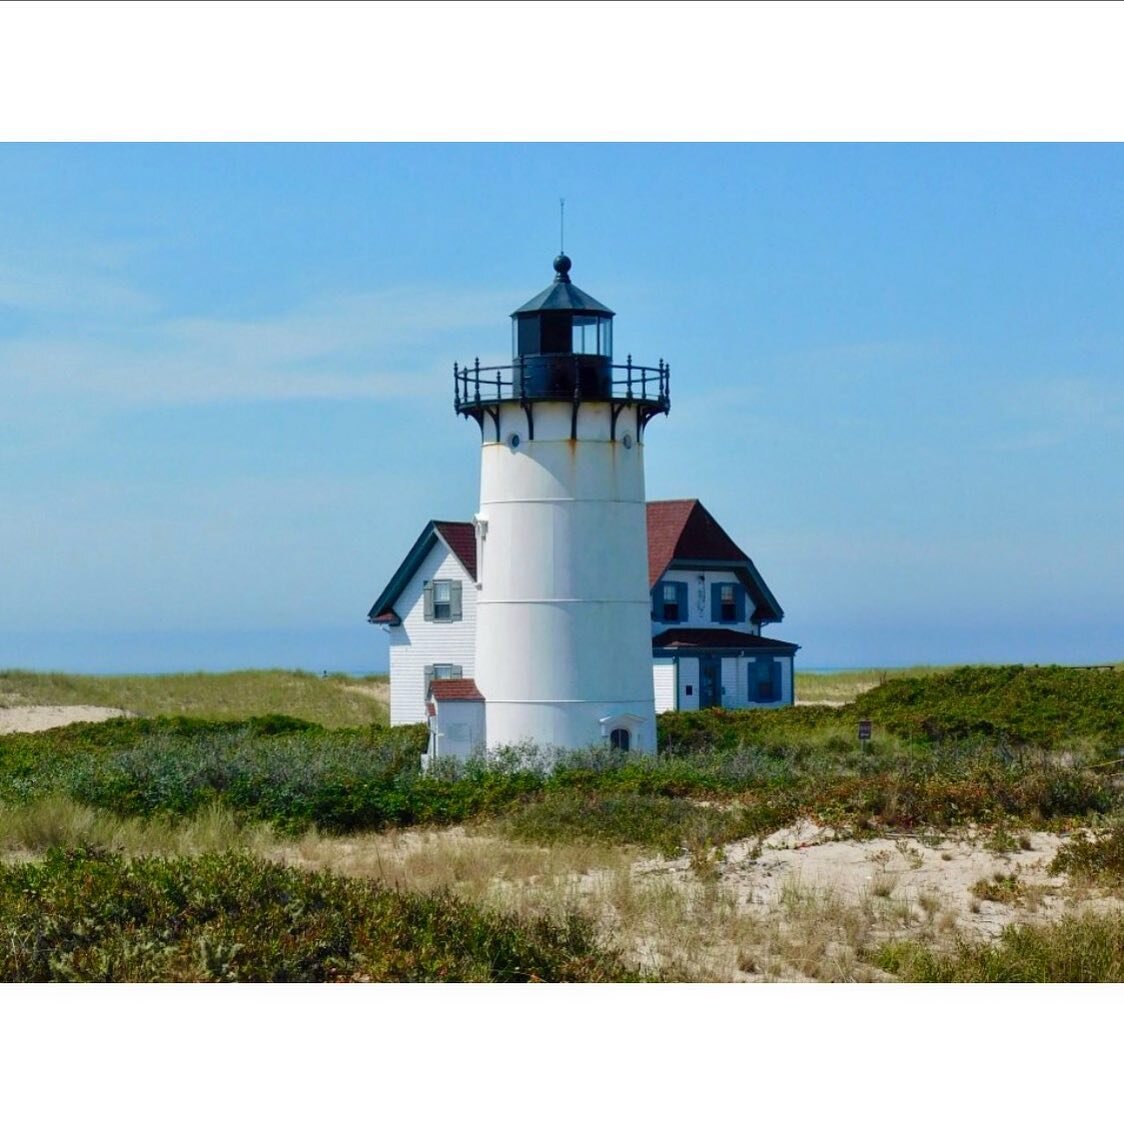 A trip to the northern tip of Cape Cod is a summer must. Here, the barren landscape is mercilessly exposed to the elements. Strong winds and ocean waves shape the aspect of this fragile, yet resilient, ecosystem. There is a magnetic beauty to this co